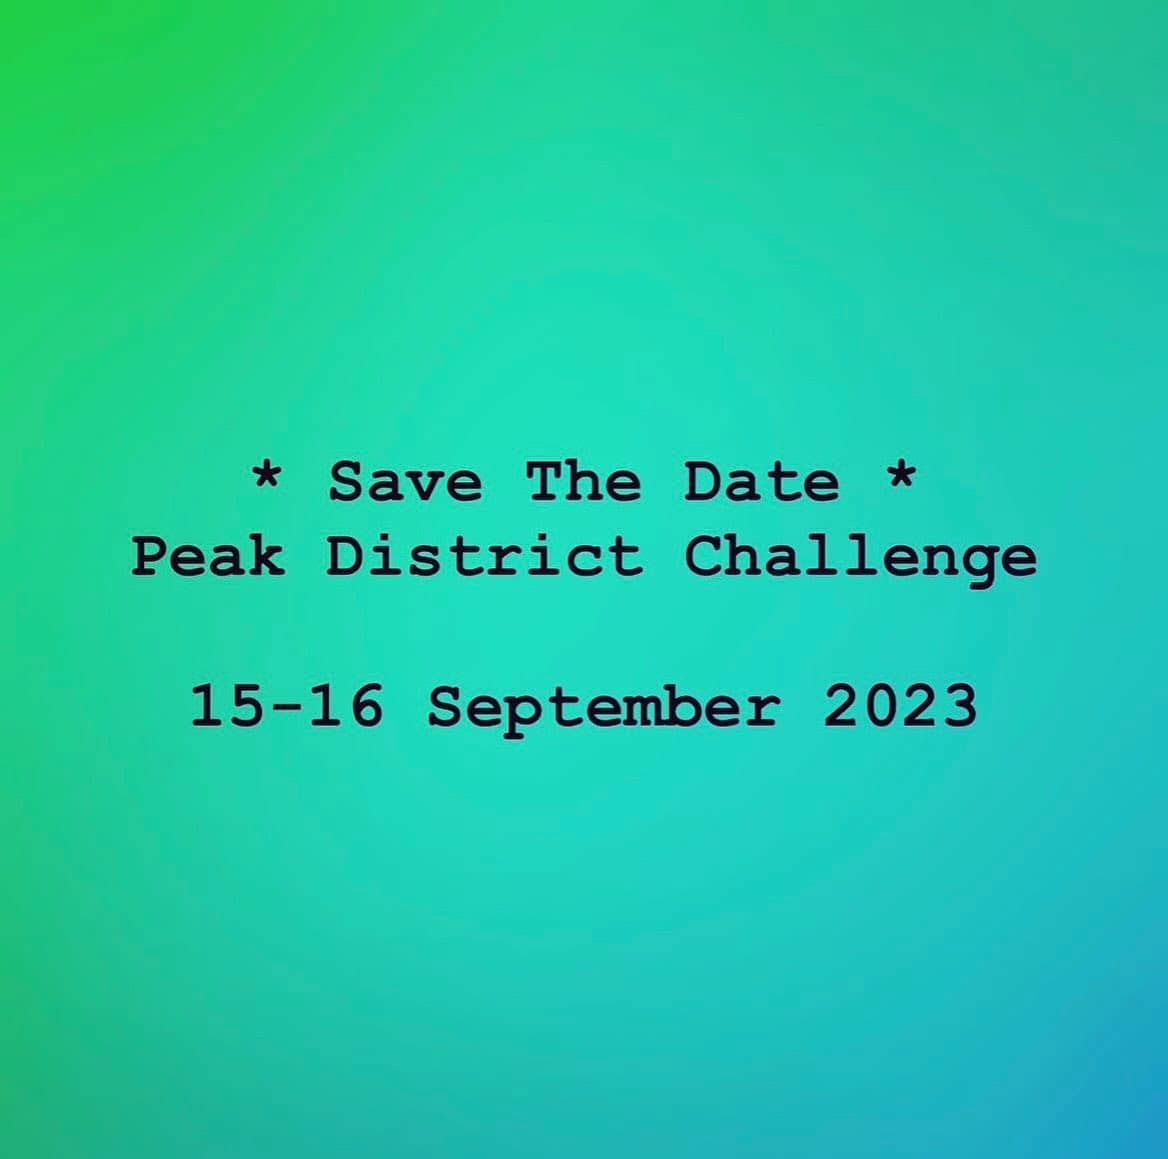 Peak District Challenge 2023 is taking place on 15-16 September! Sign up to our mailing list to b...